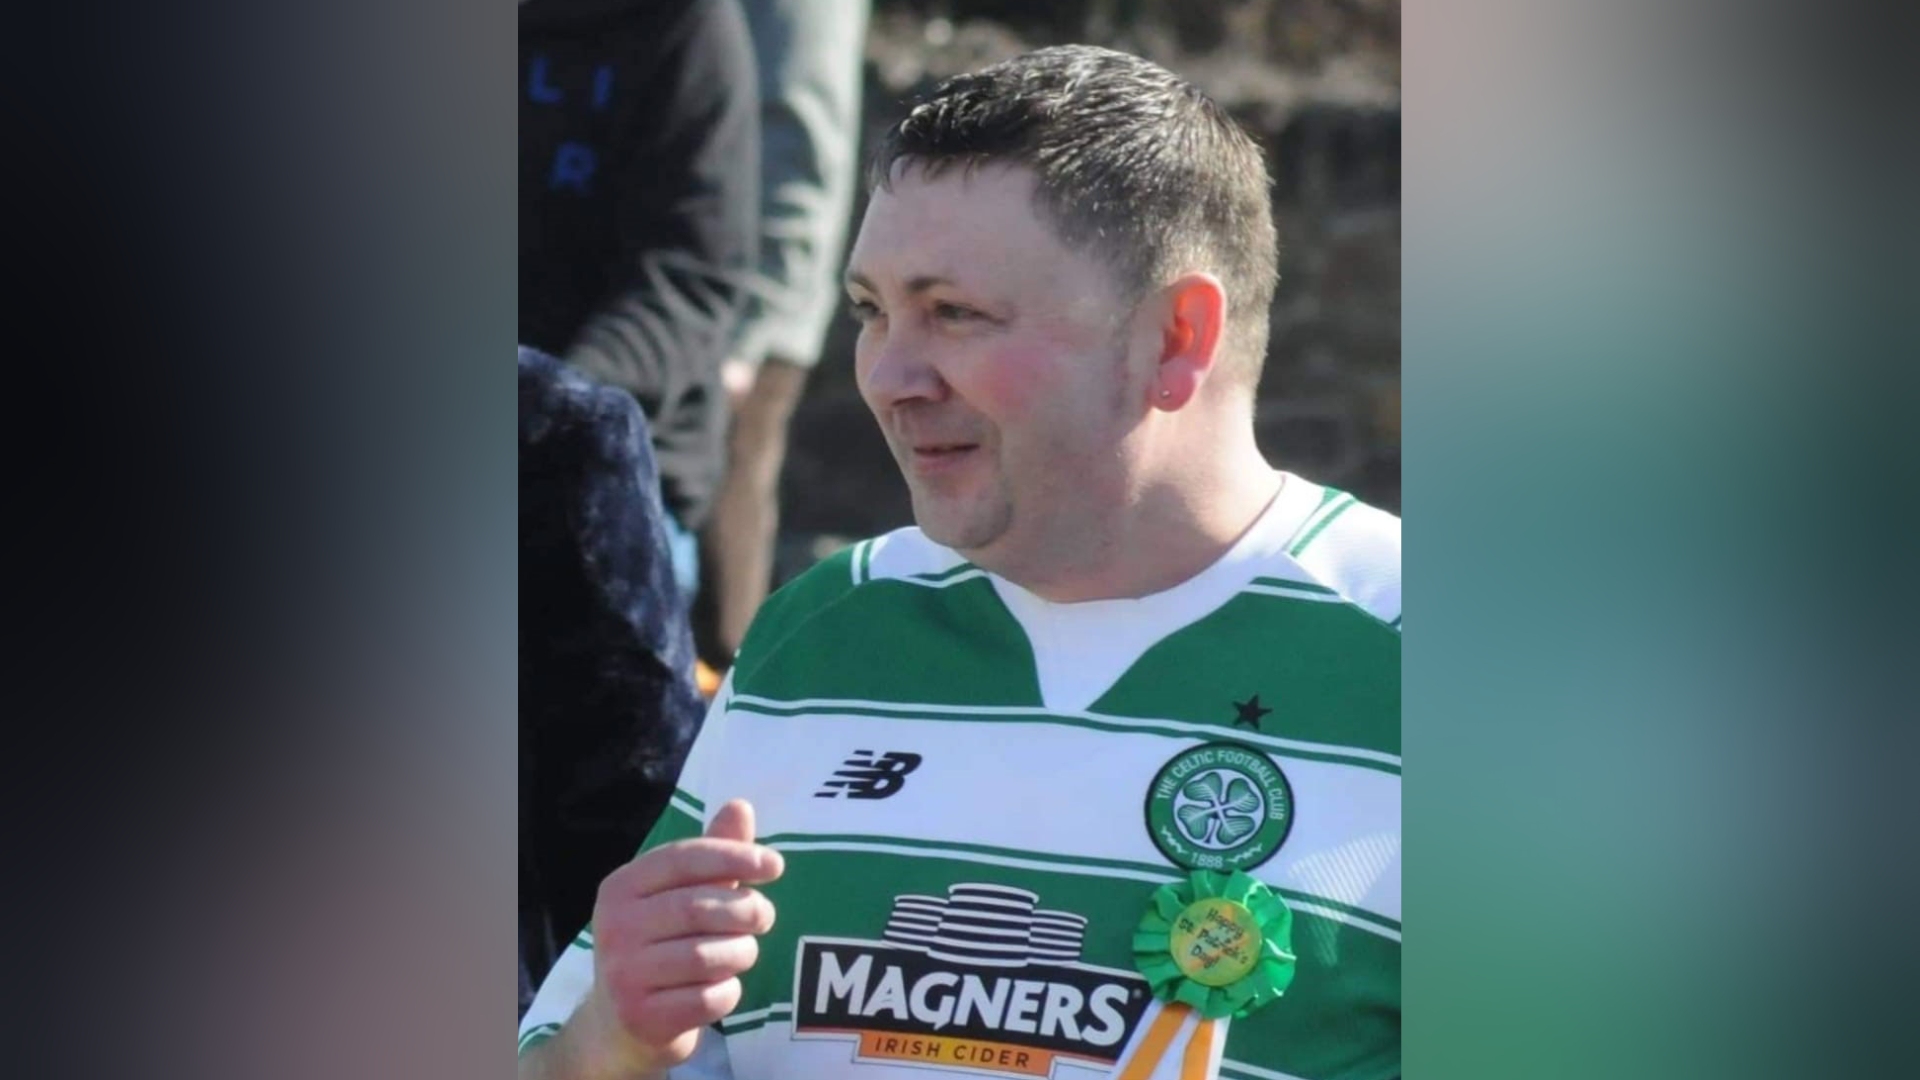 Martin McGill, 49, was one of ten people who lost their life in the explosion at a petrol station complex in County Donegal on Friday.